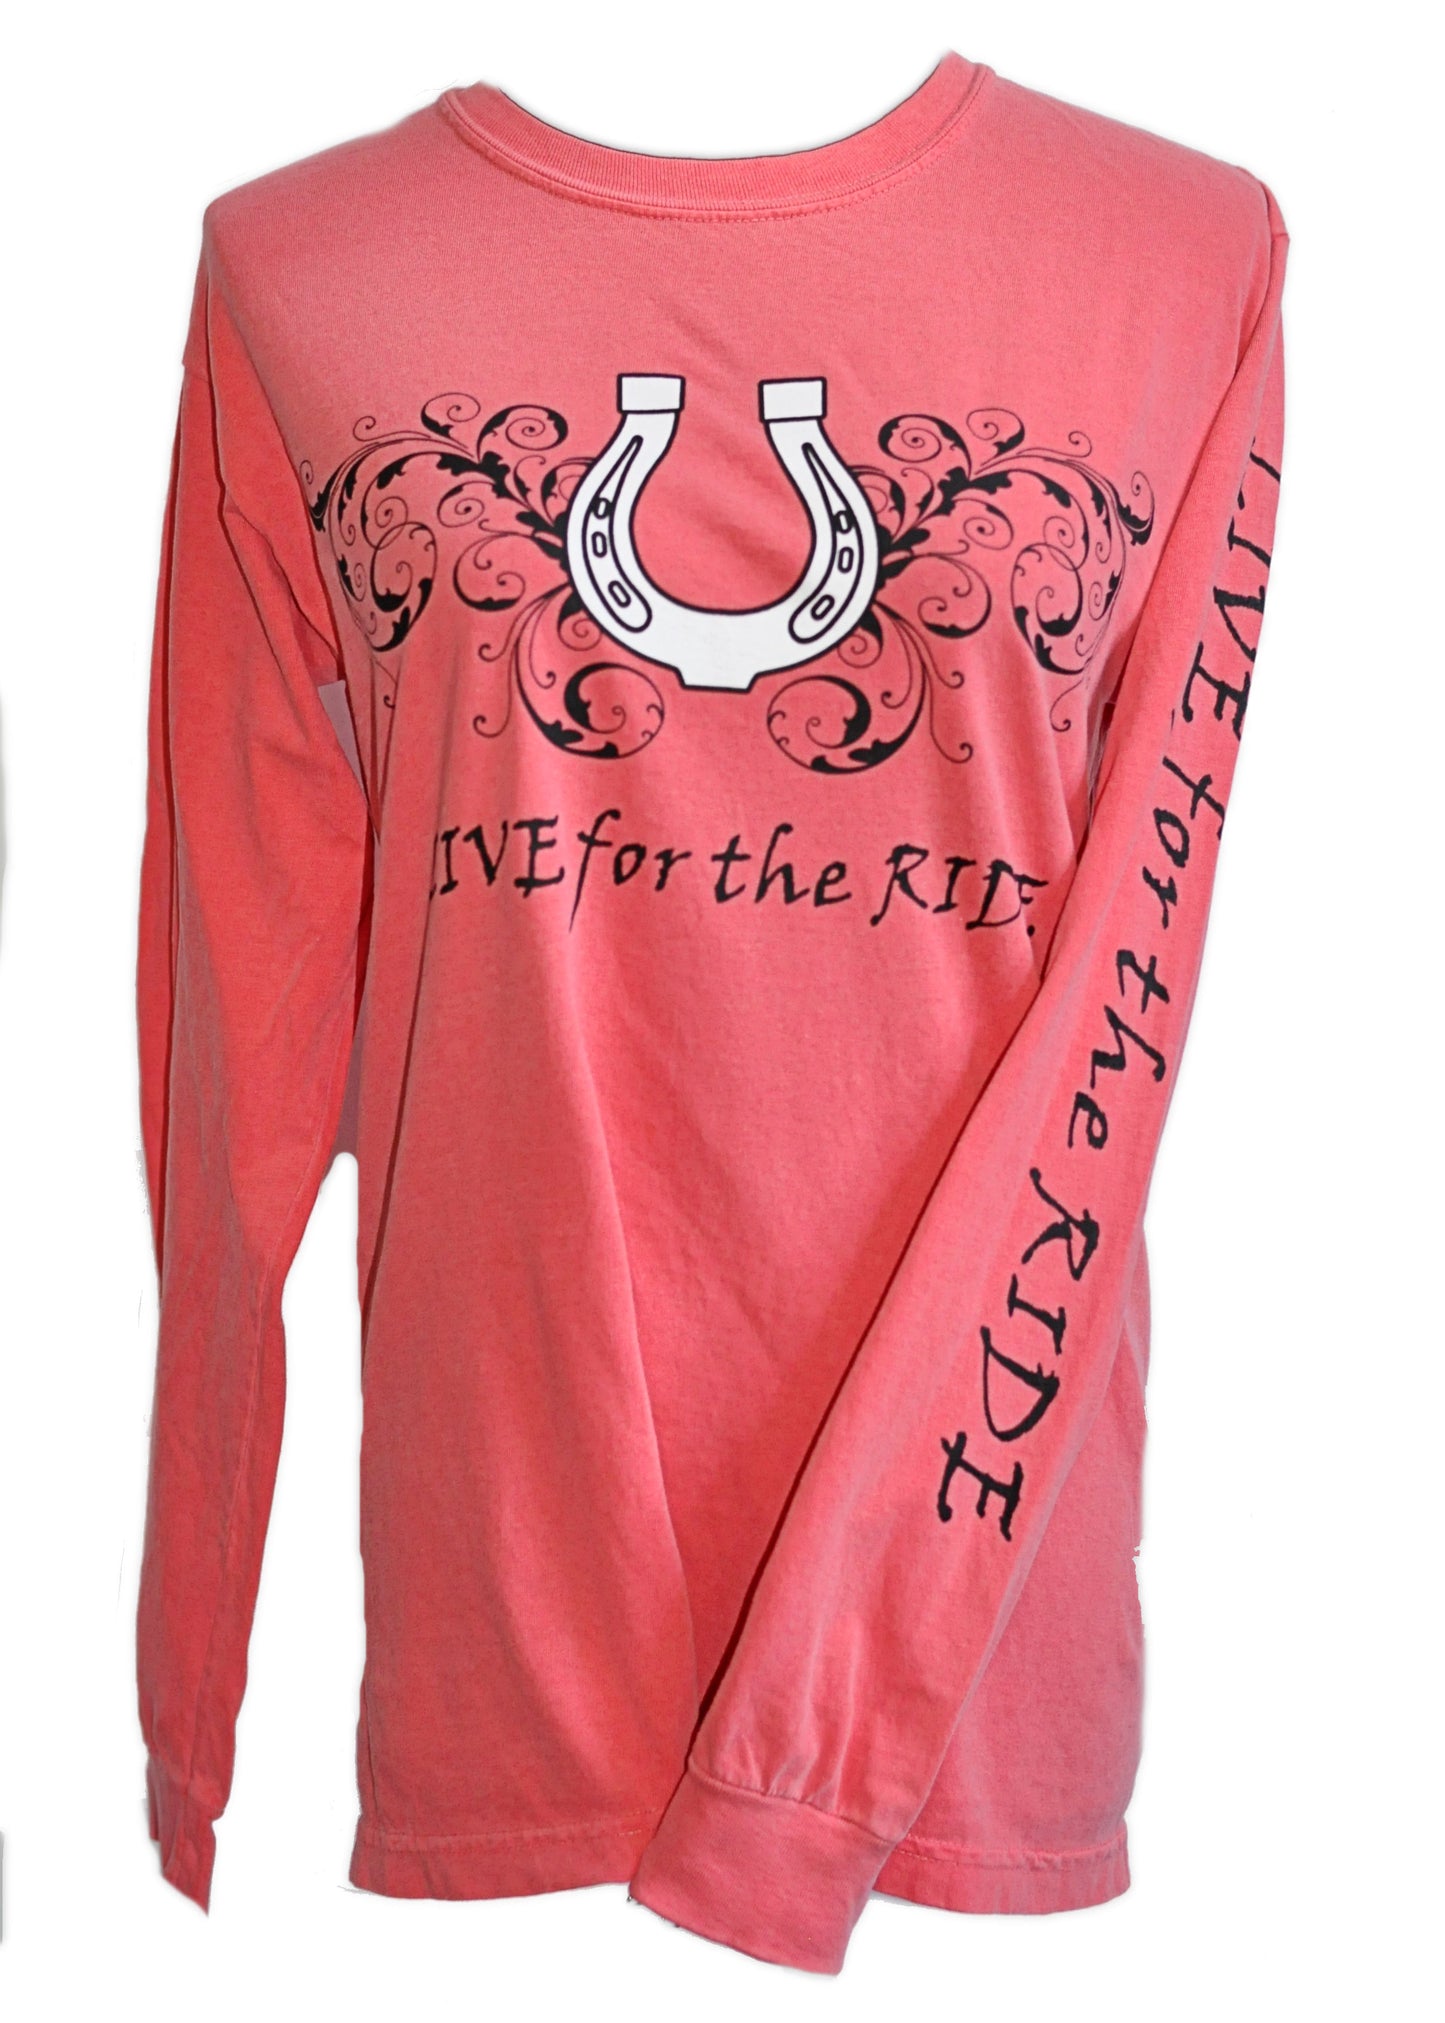 Horseshoe LONG Sleeve T-shirt - Live for the Ride 